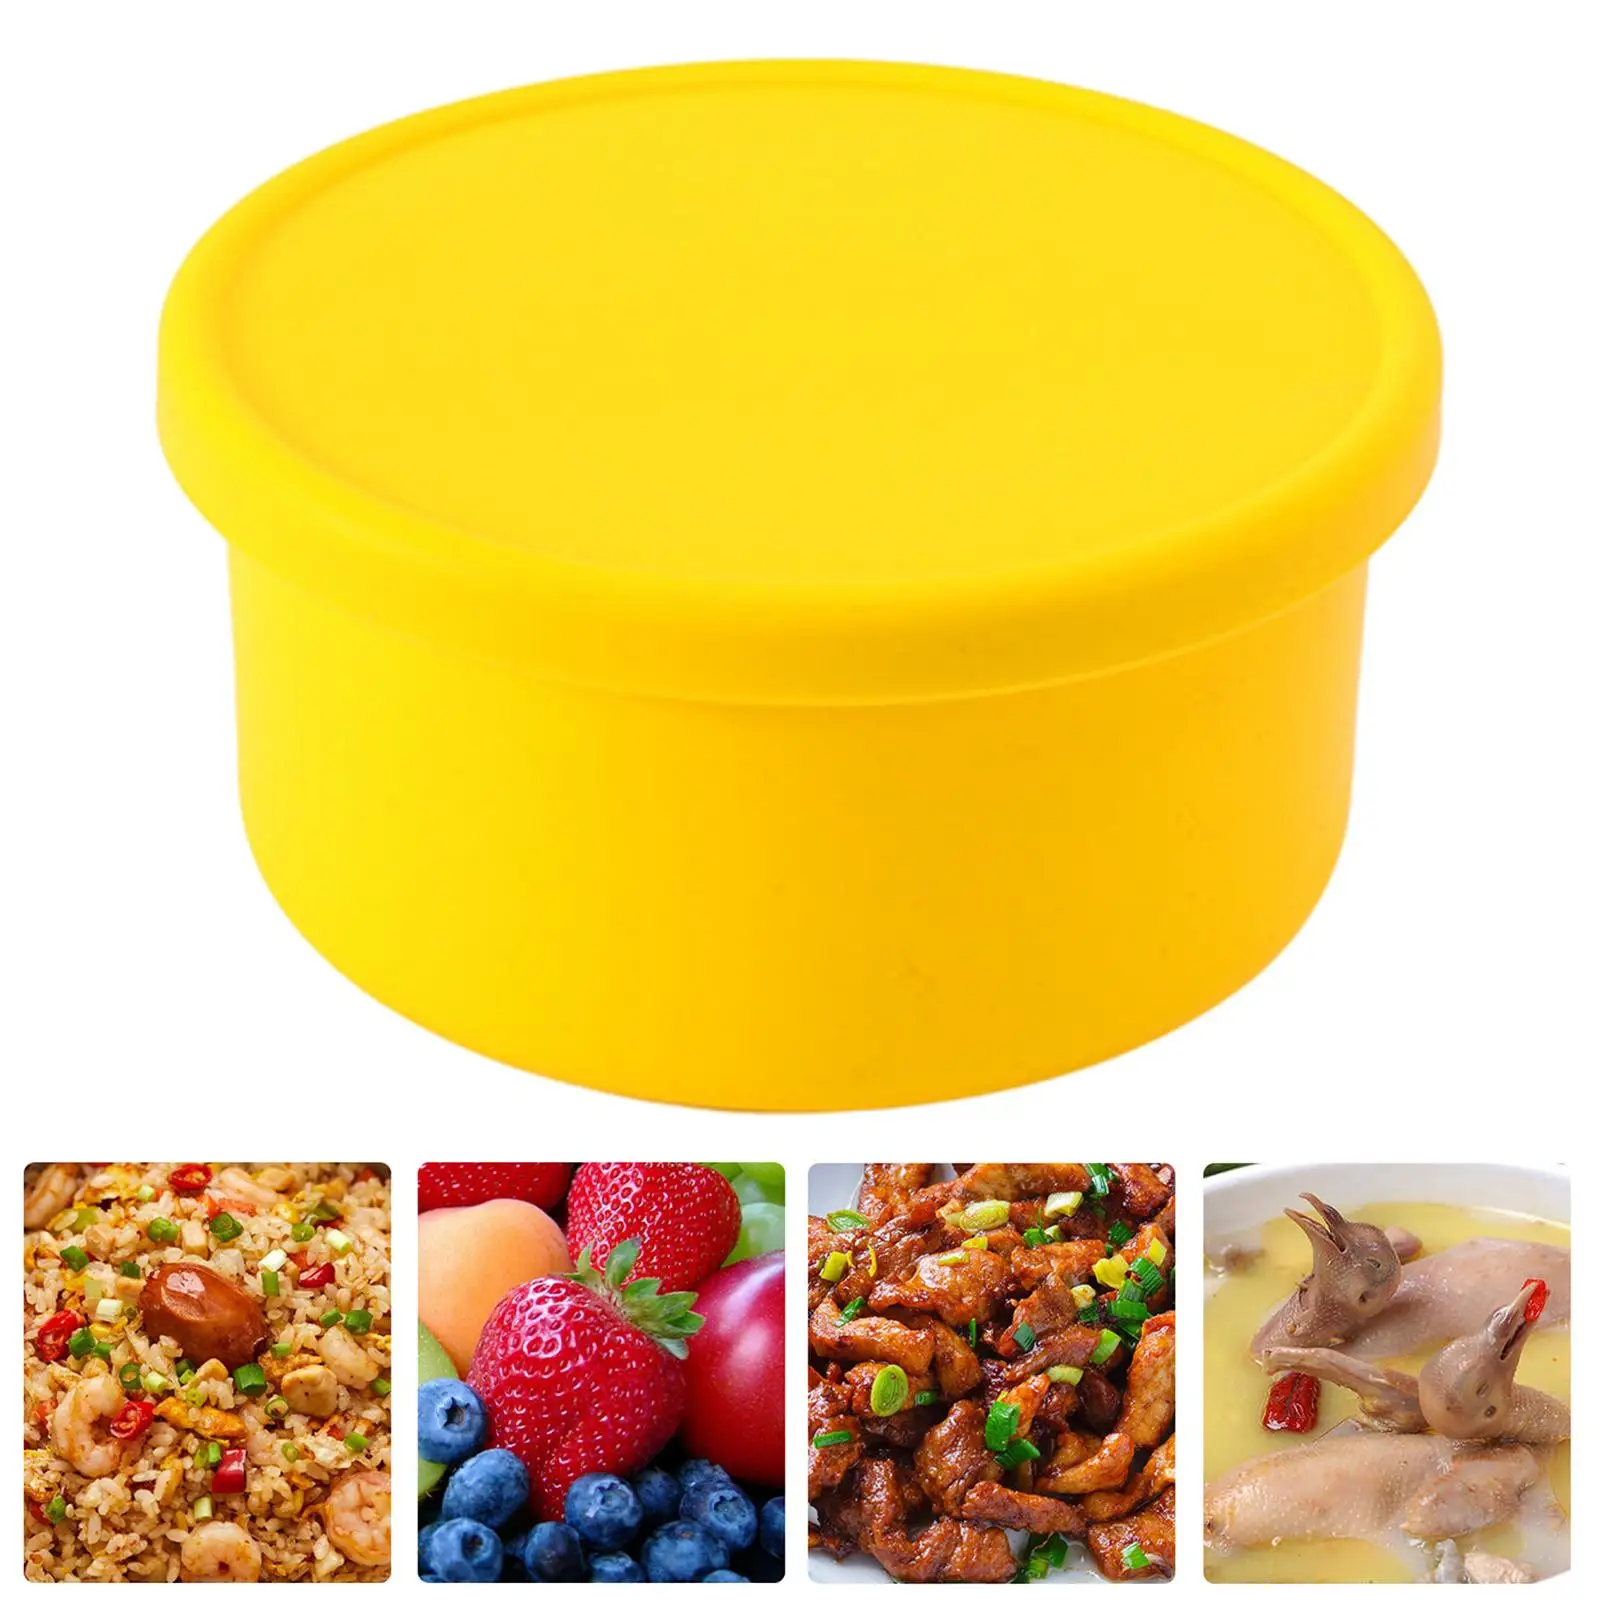 Bento Box, , Multipurpose Microwaveable Sandwich Box Reusable Silicone for Student Office Worker Picnic Camping